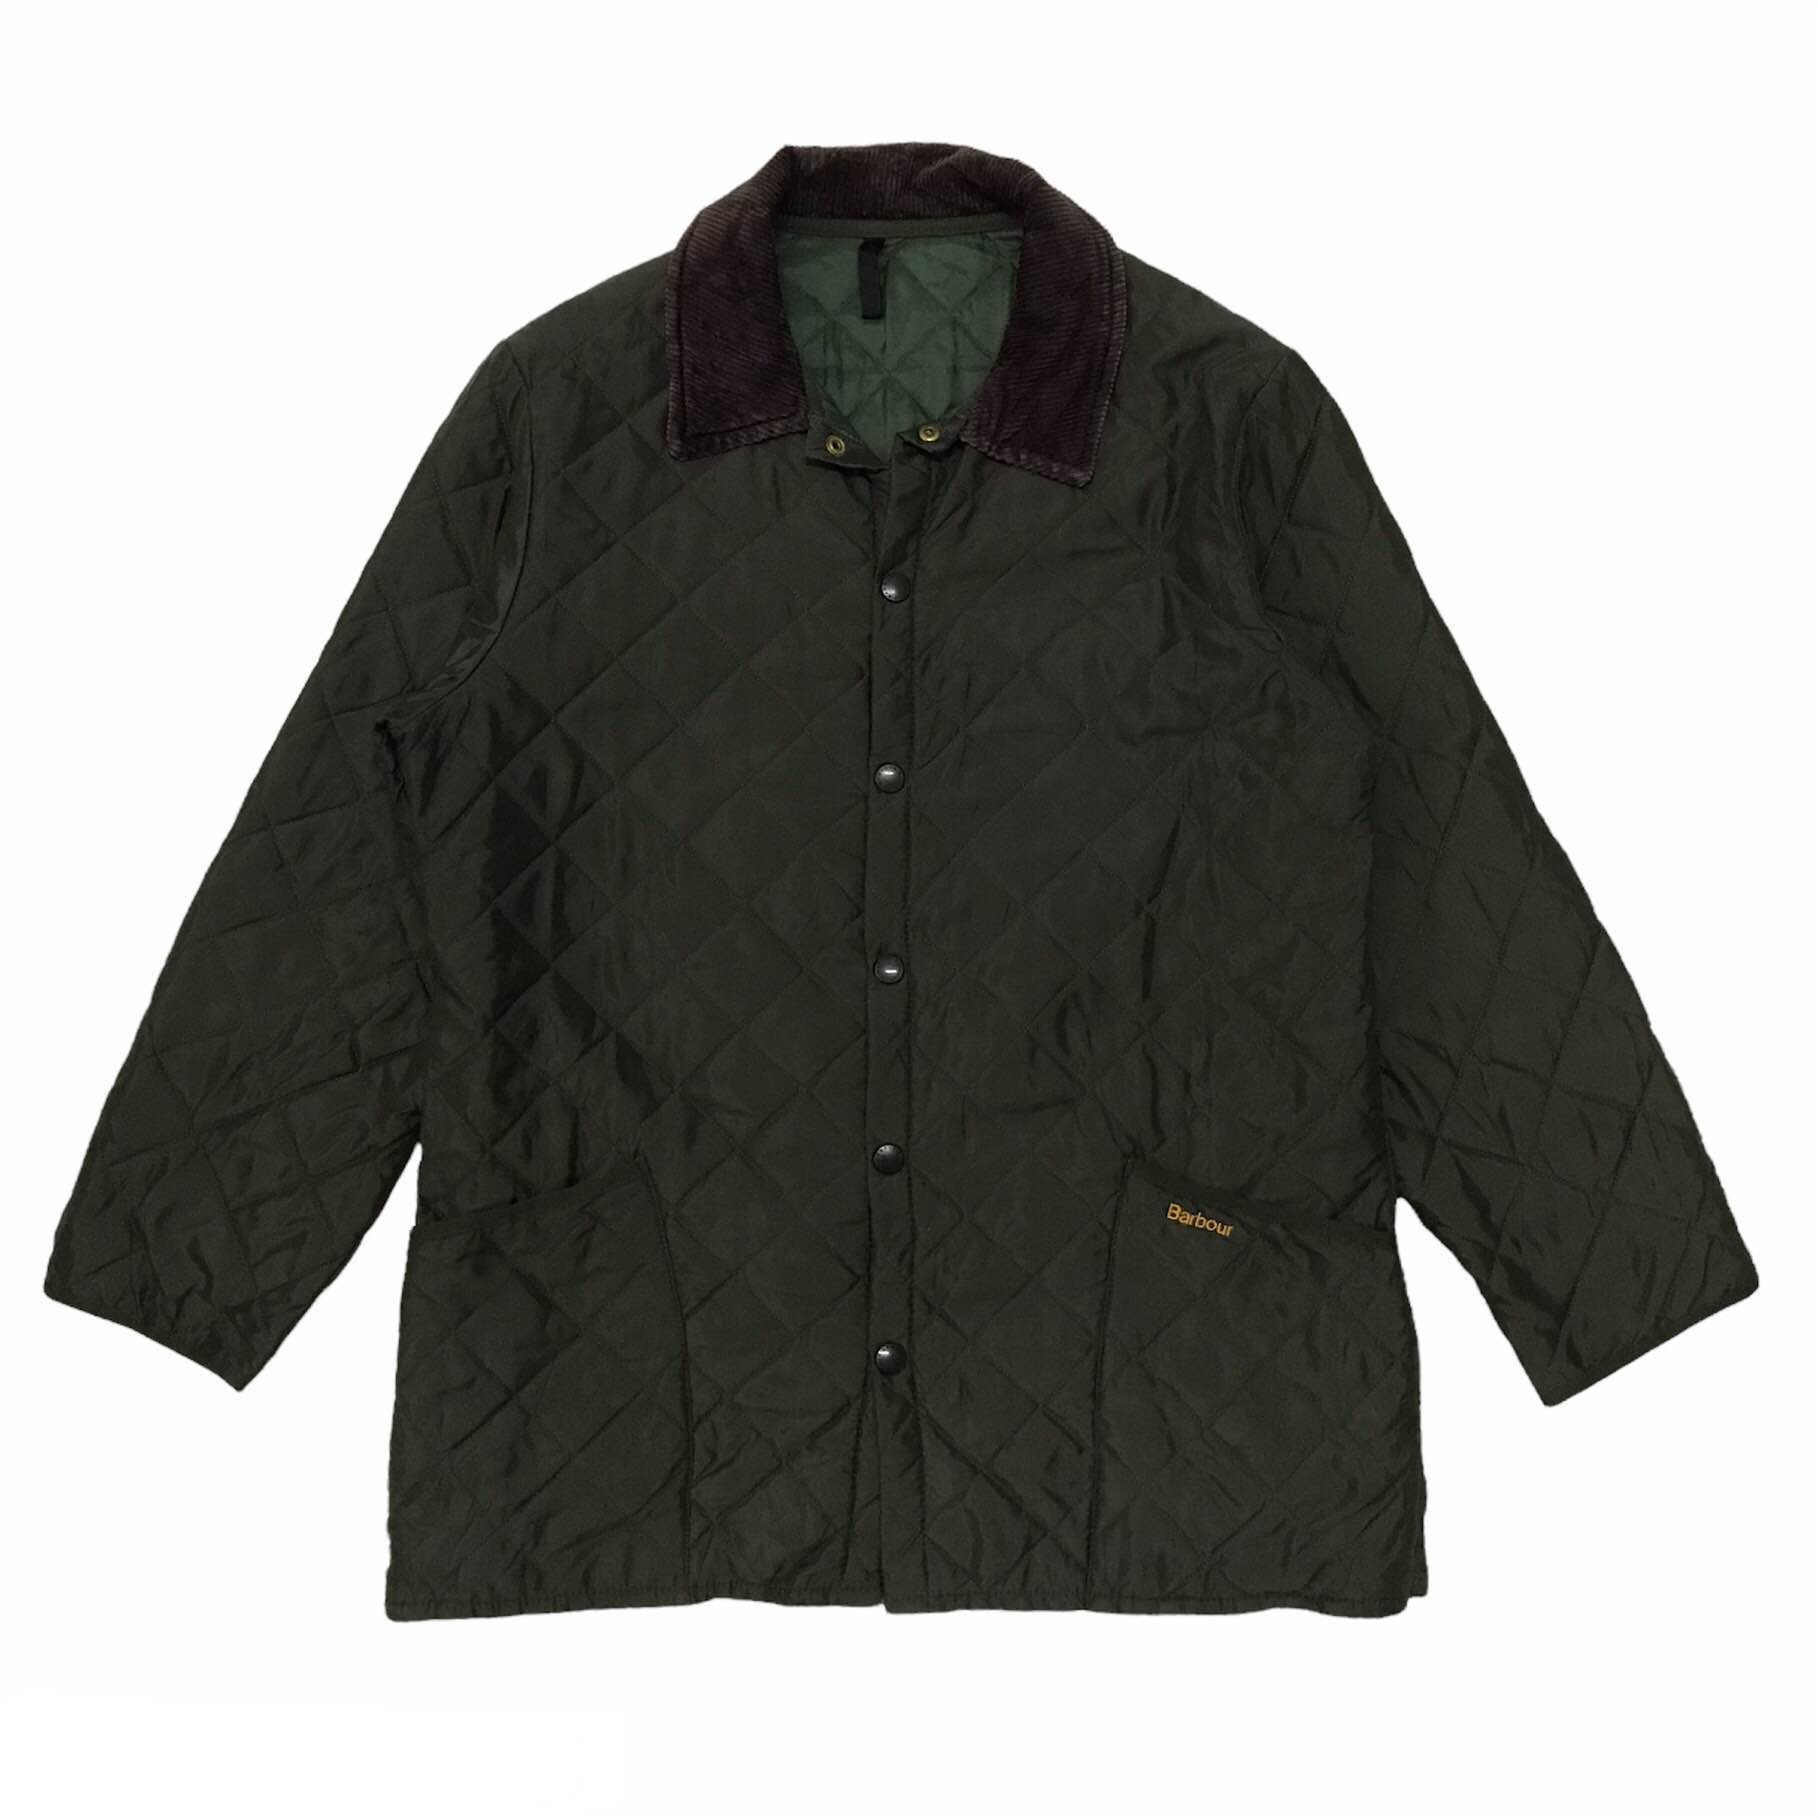 Barbour Eskdale Quilted Jacket Made in London - 1